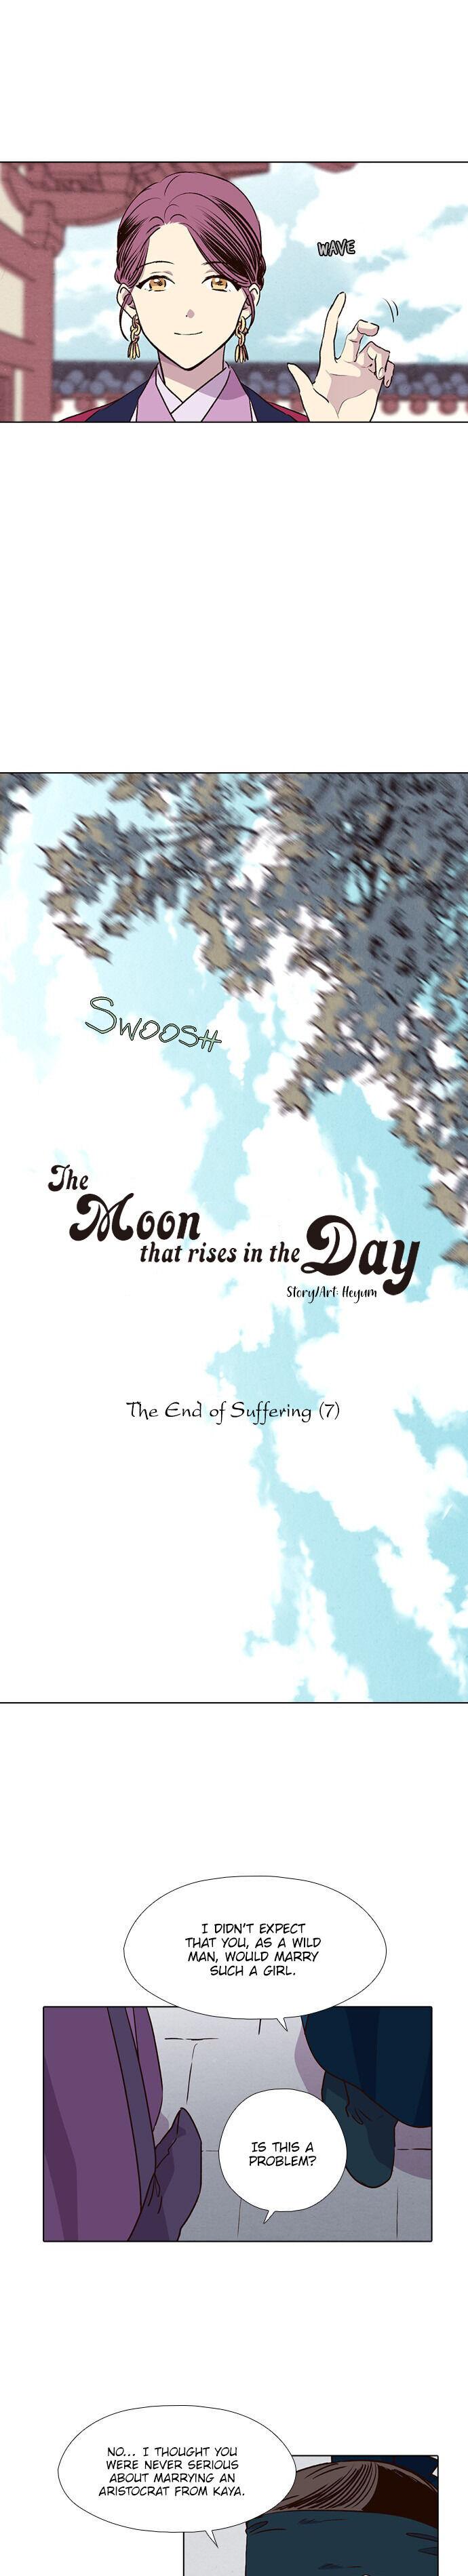 Moonrise During the Day - episode 192 - 7